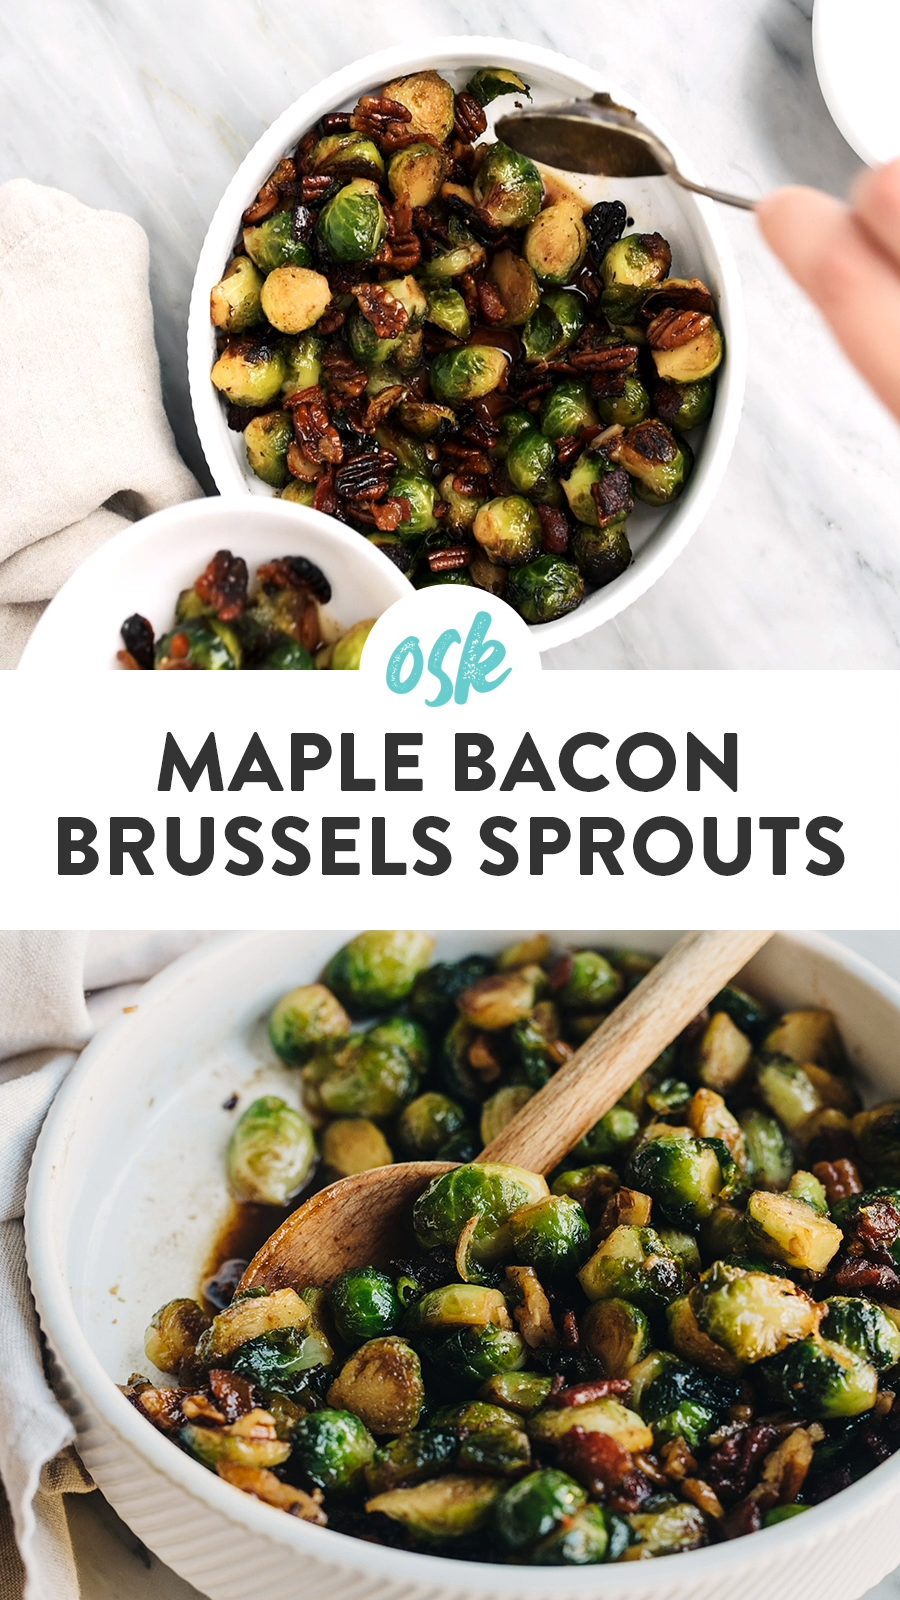 Maple Bacon Brussels Sprouts - Maple Bacon Brussels Sprouts -   19 easy healthy thanksgiving sides ideas